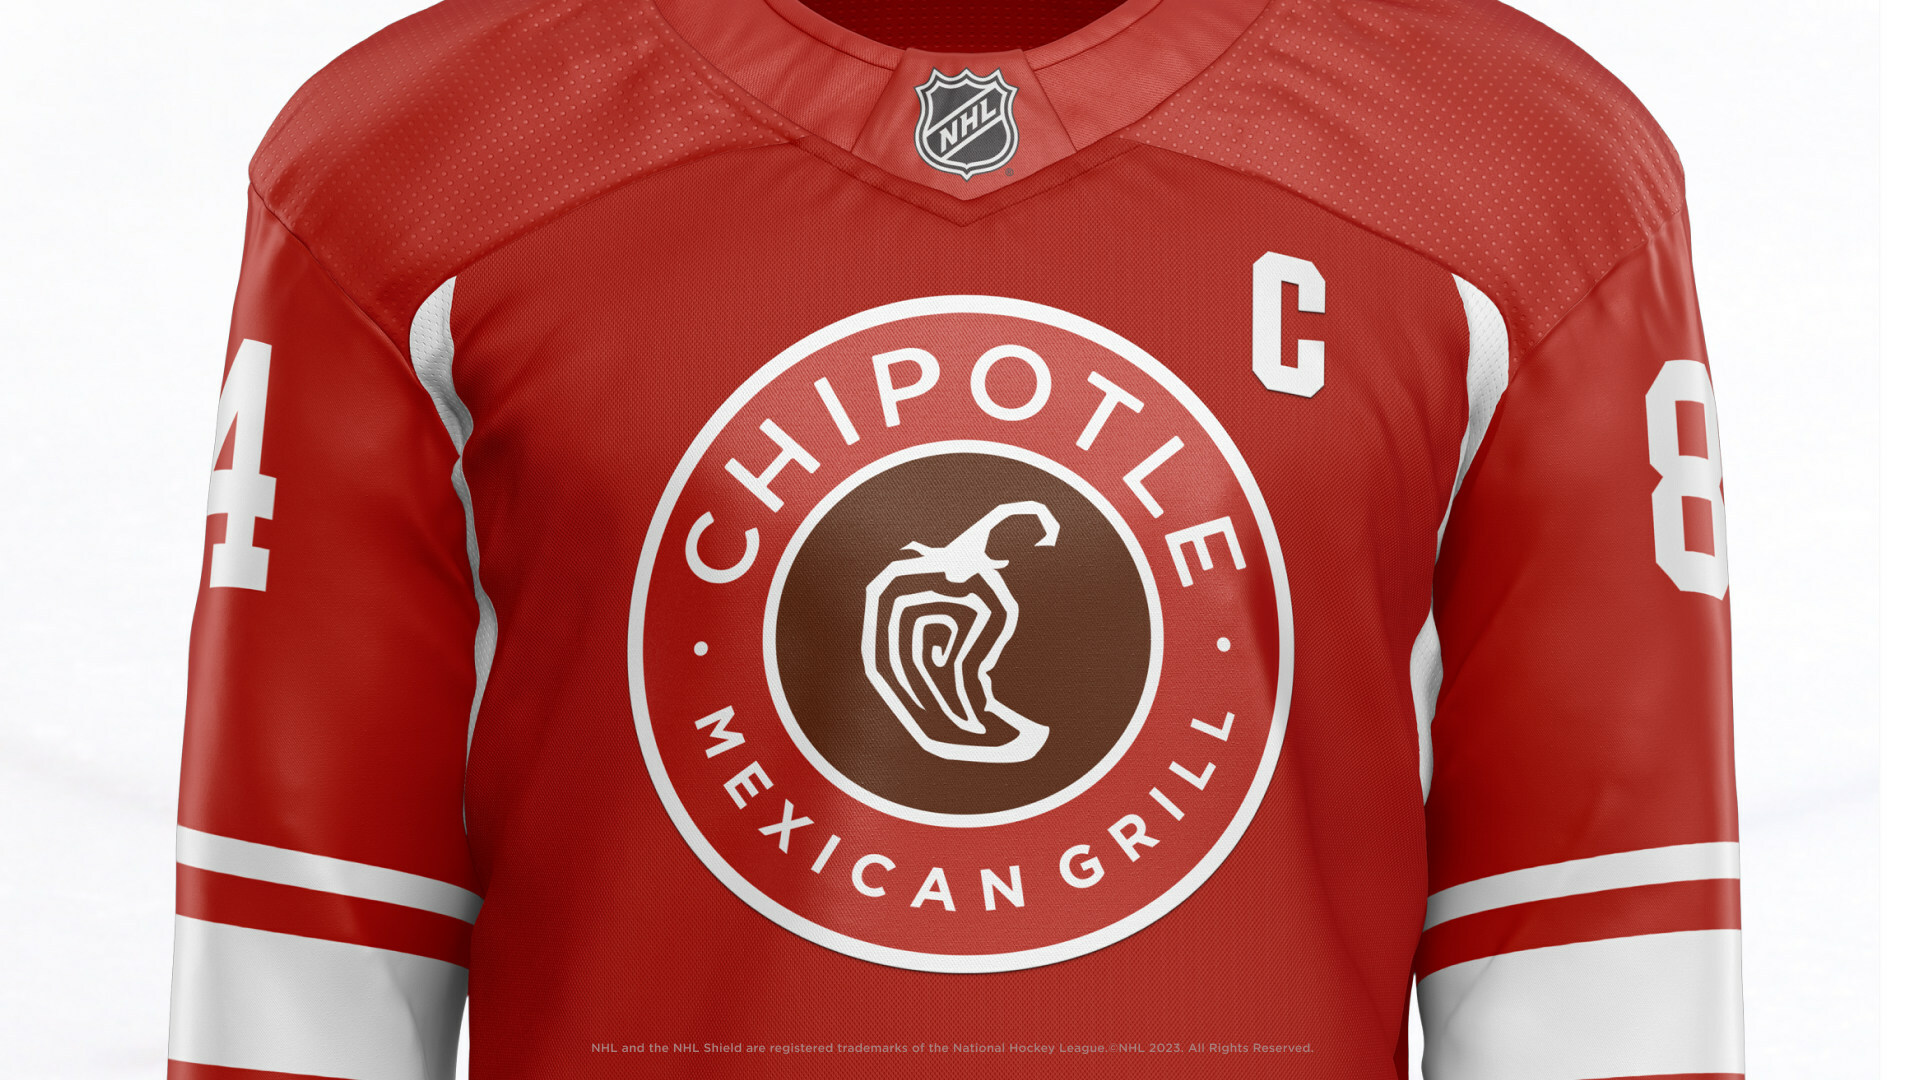 CHIPOTLE CELEBRATES THE 2023 STANLEY CUP® PLAYOFFS WITH HOCKEY JERSEY BOGO  OFFER IN THE U.S. AND CANADA